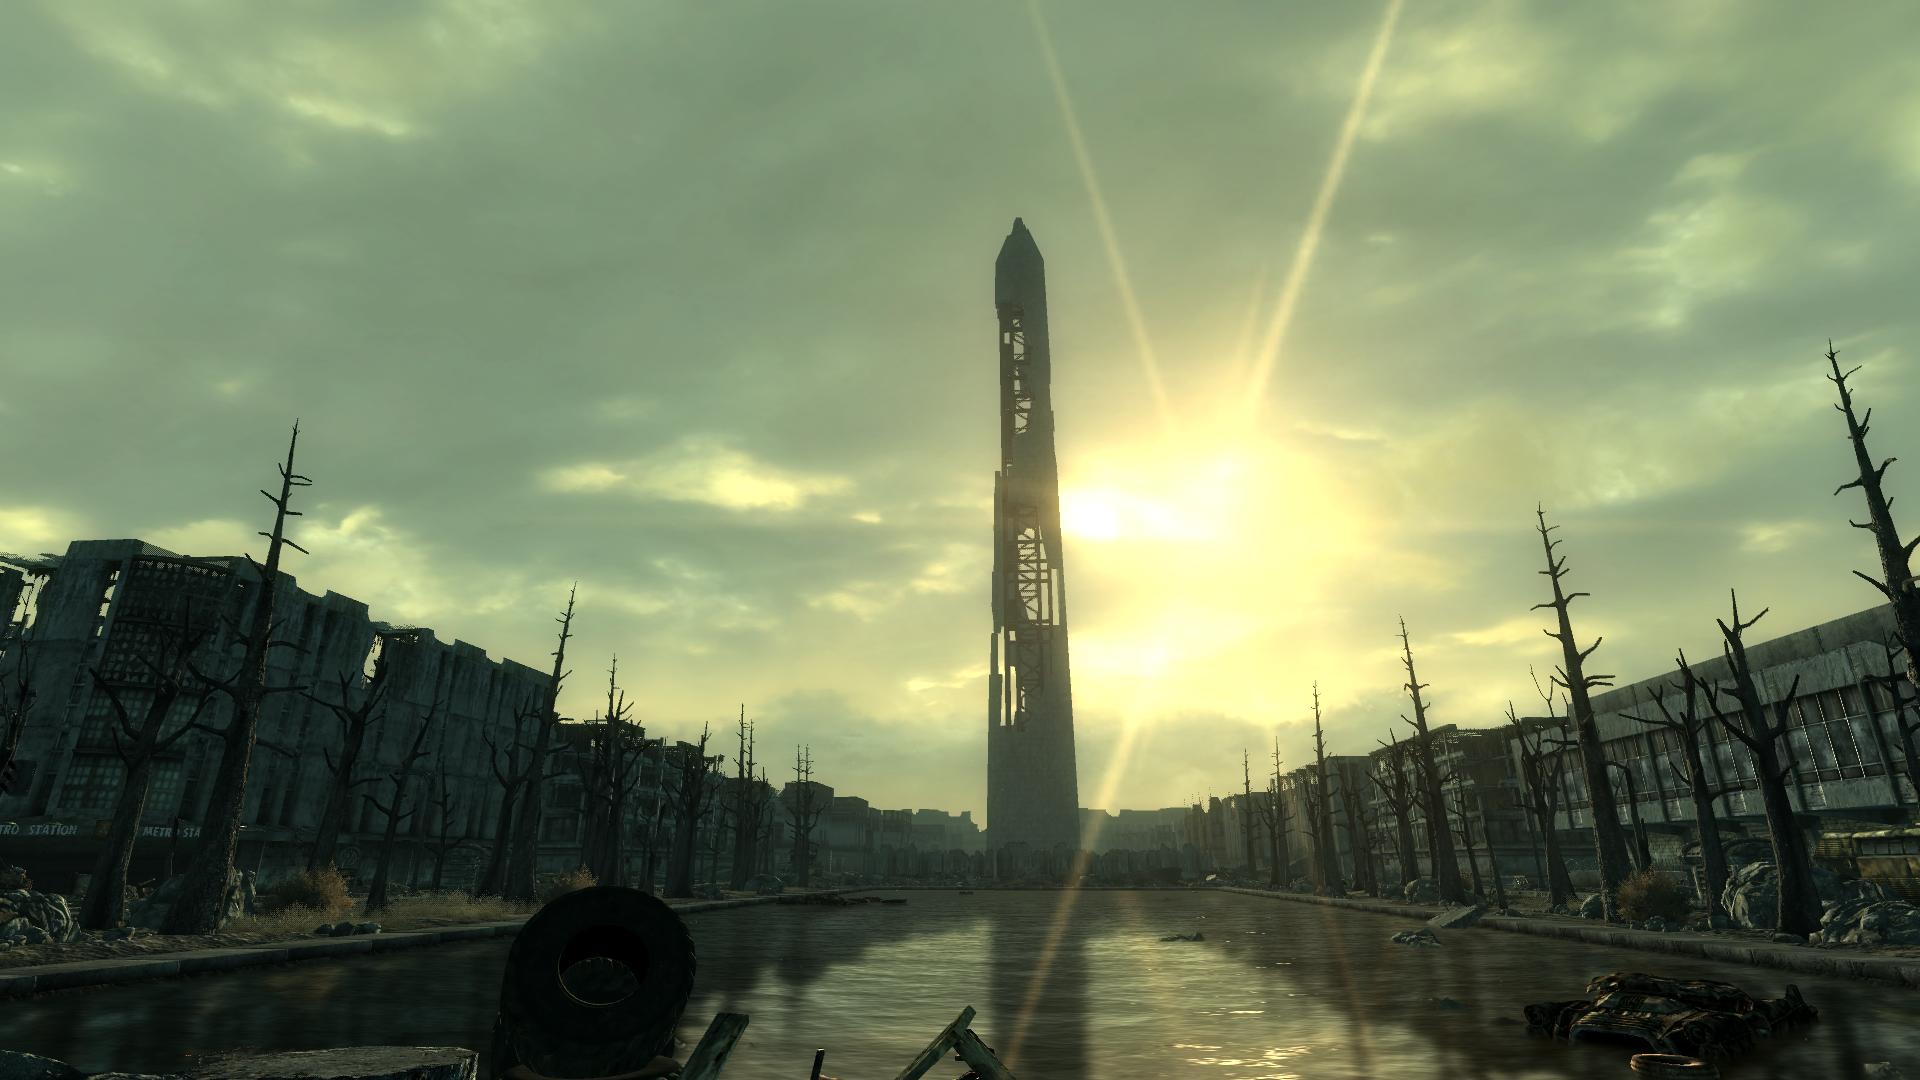 Background Puter Fallout3 Fallout